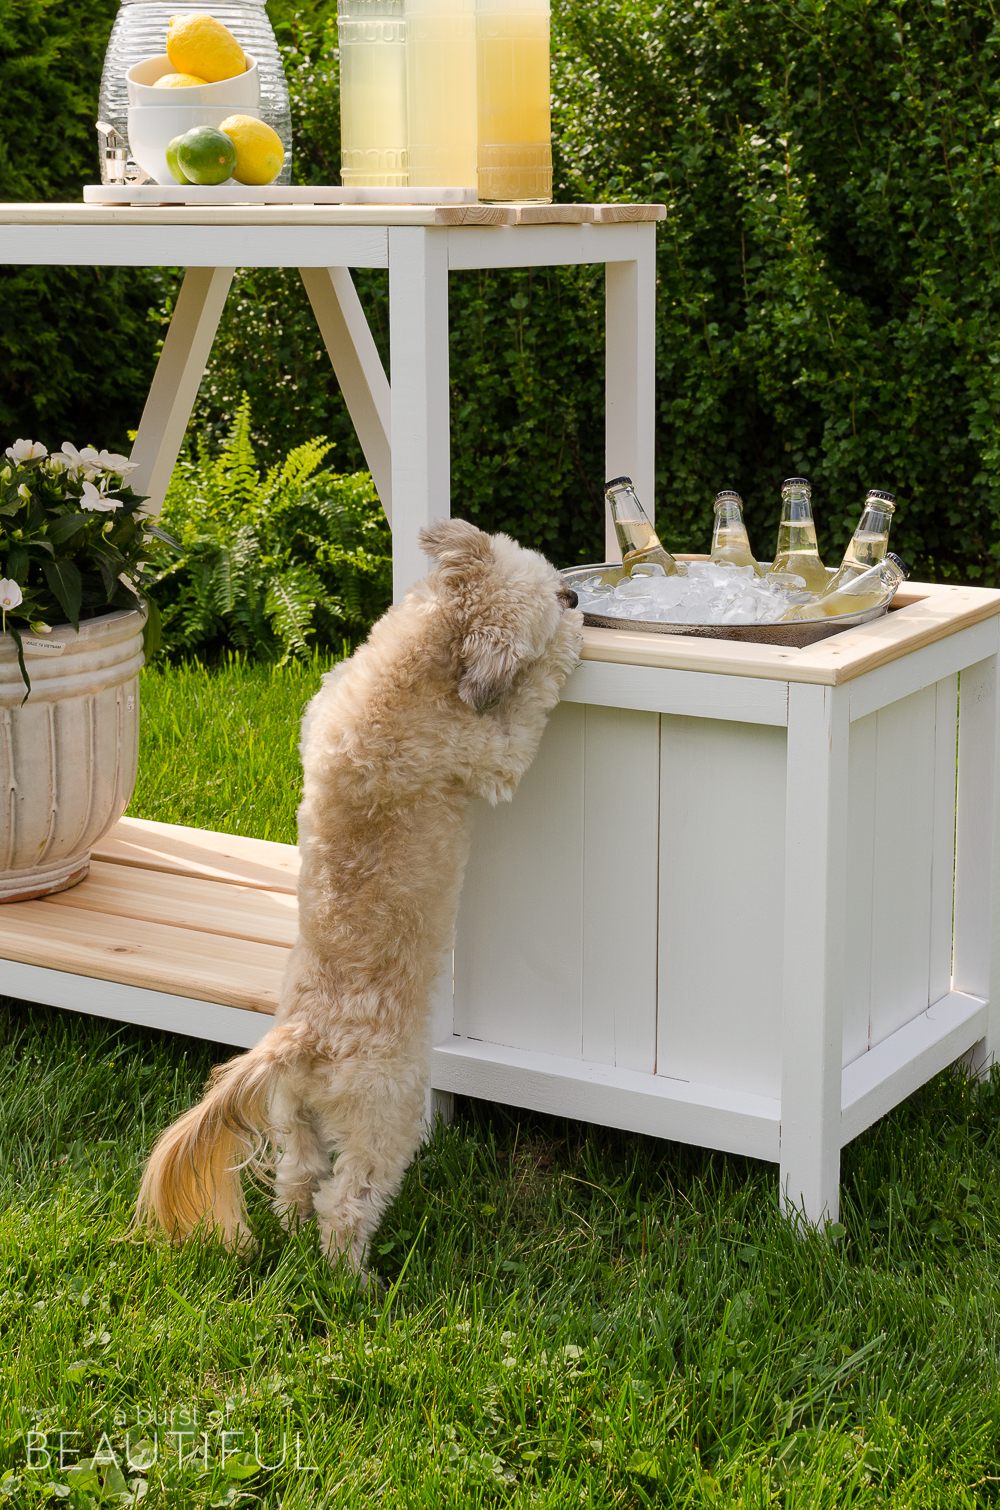 Summer entertaining is easy with this beautiful DIY outdoor bar + free plans.